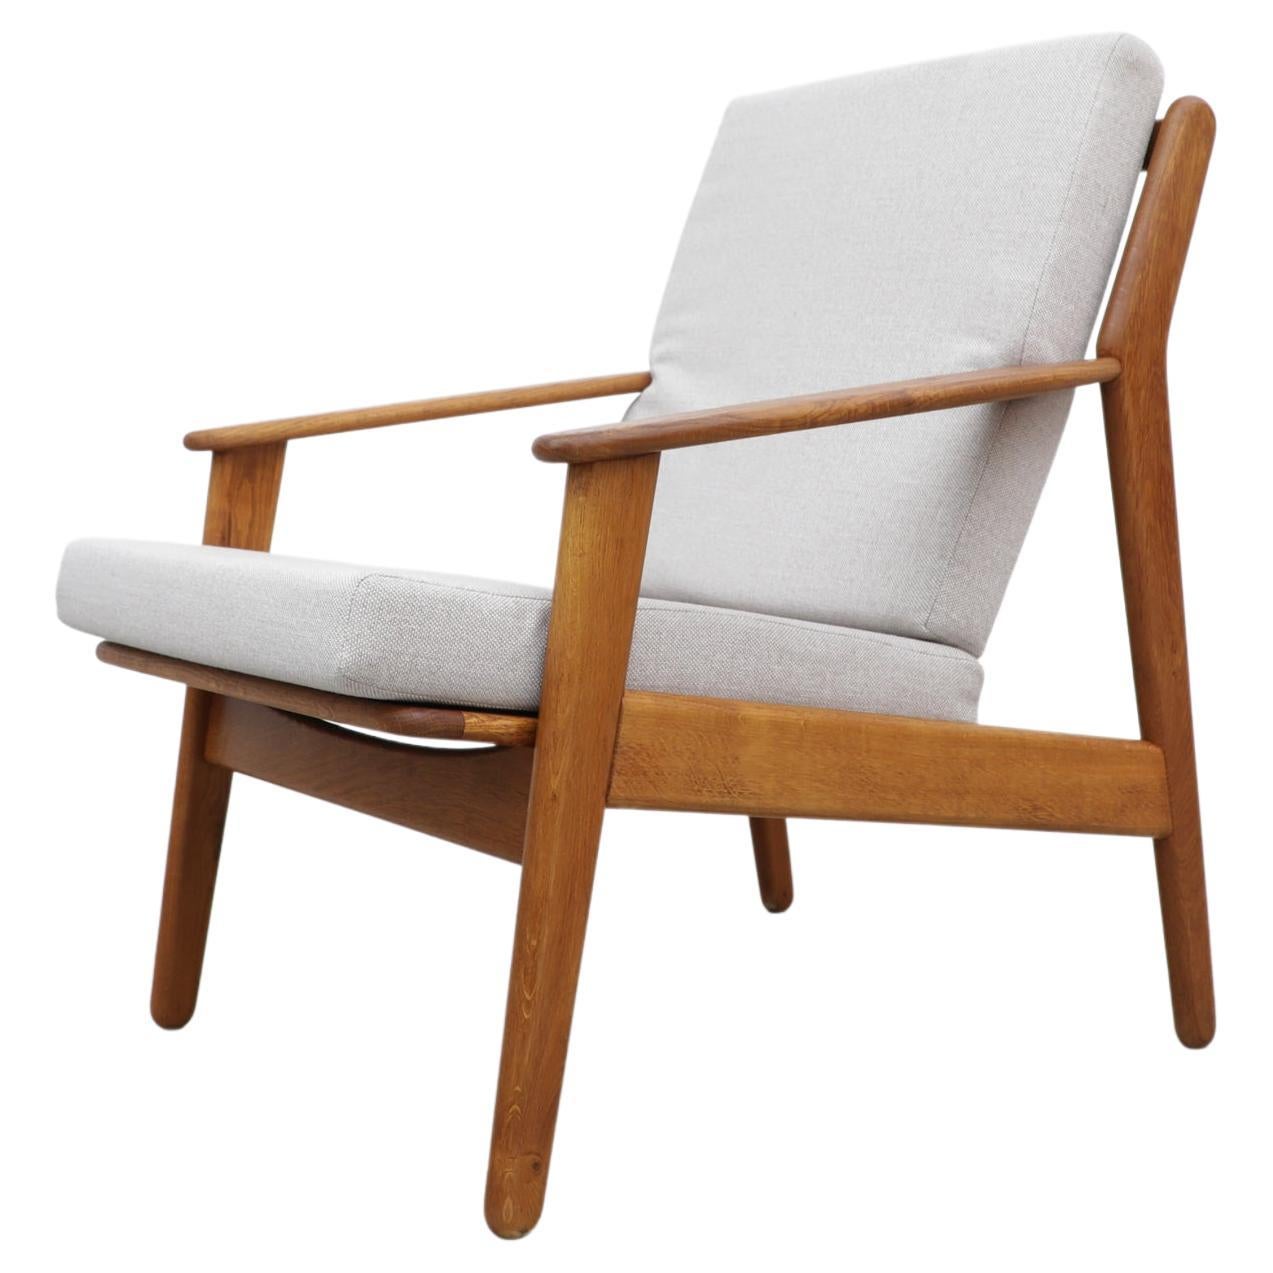 Poul Volther Teak Lounge Chair with Grey Cushions